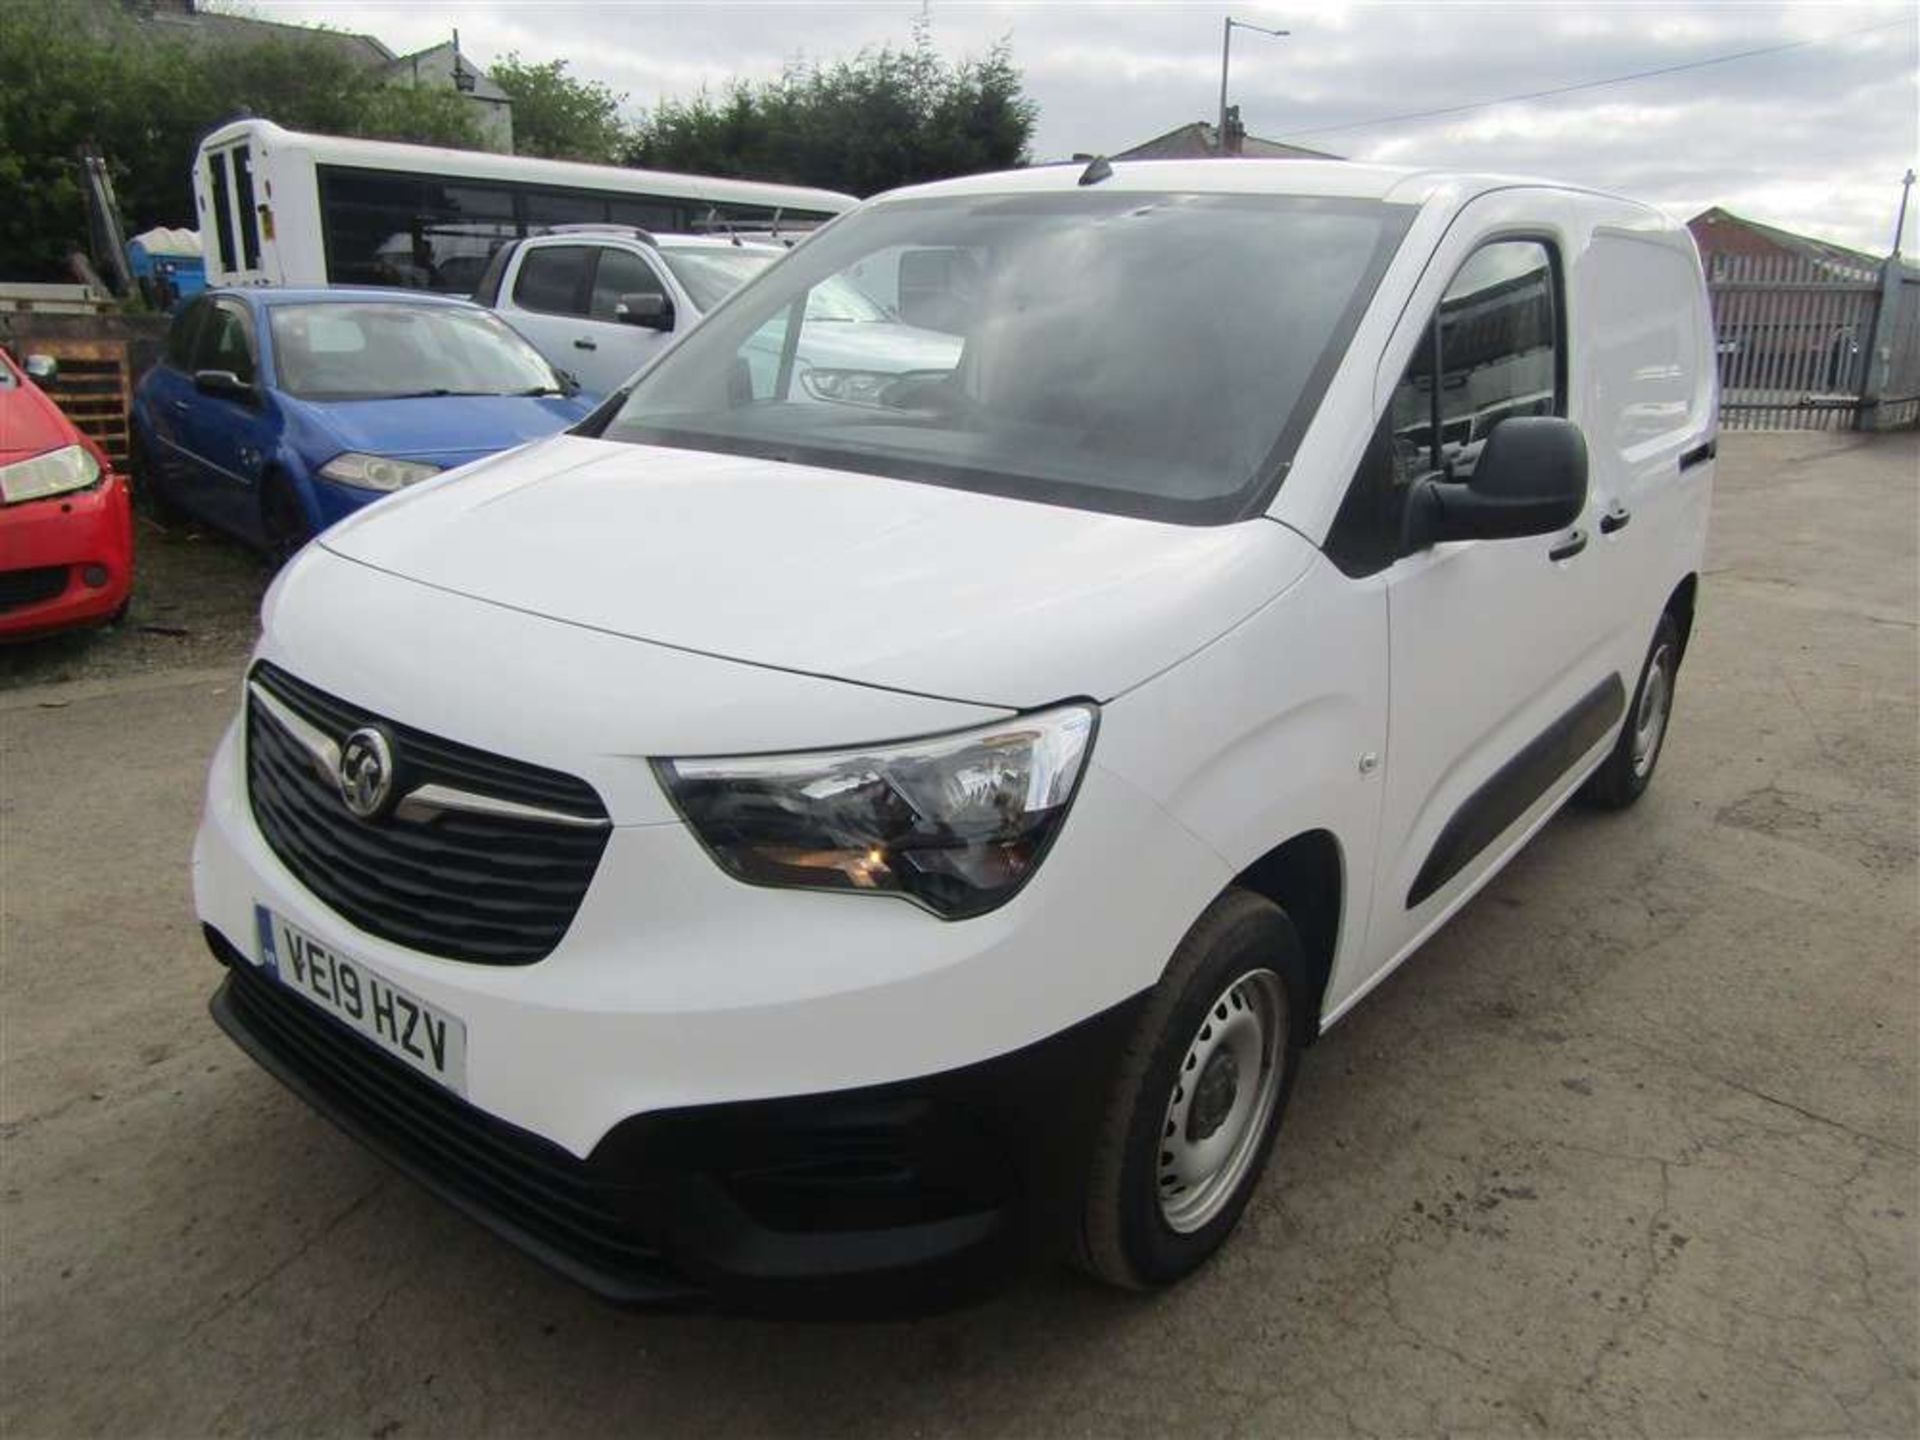 2019 19 reg Vauxhall Combo 2000 Edition T/D S/S - ONLY 36K Miles - Image 2 of 7